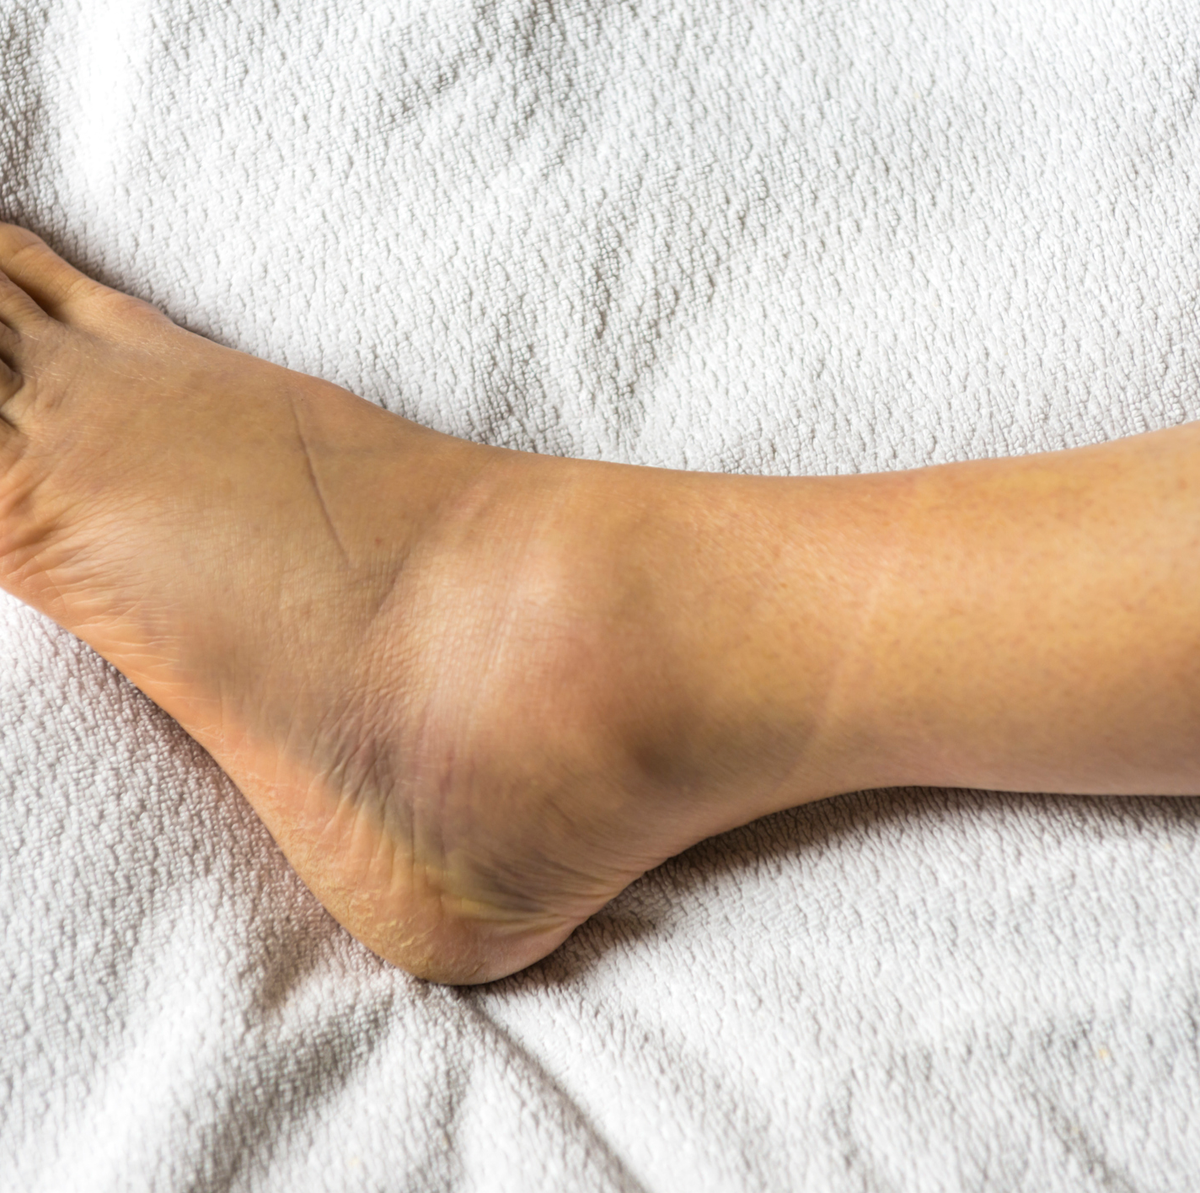 12 Causes Of Swollen Ankles Feet Why Are My Ankles Swollen